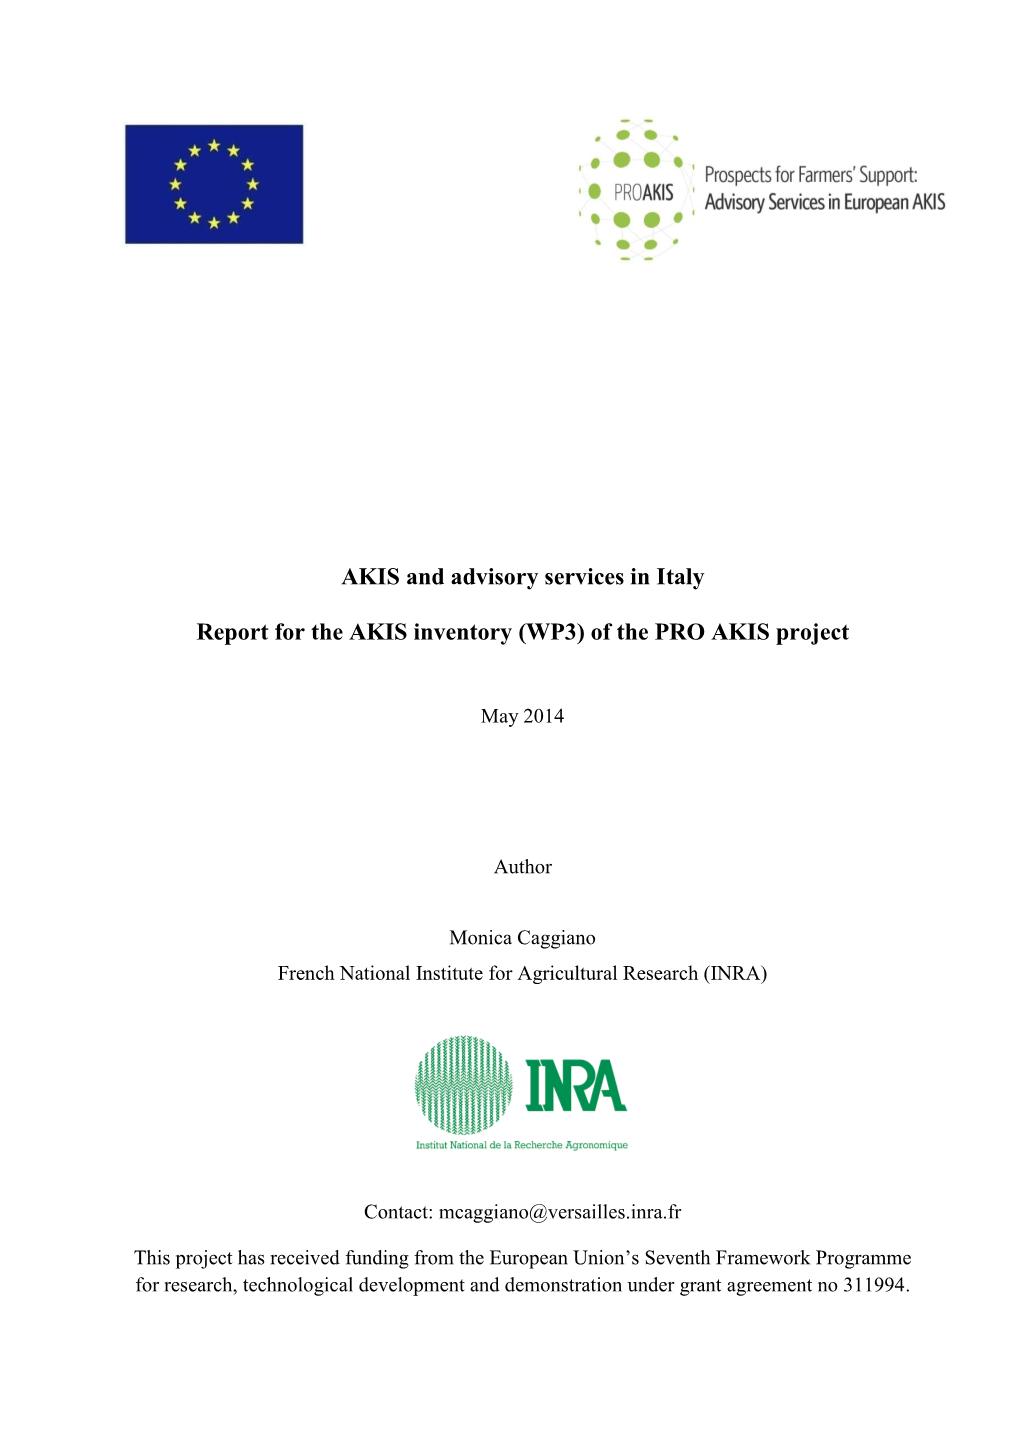 AKIS and Advisory Services in Italy Report for the AKIS Inventory (WP3)